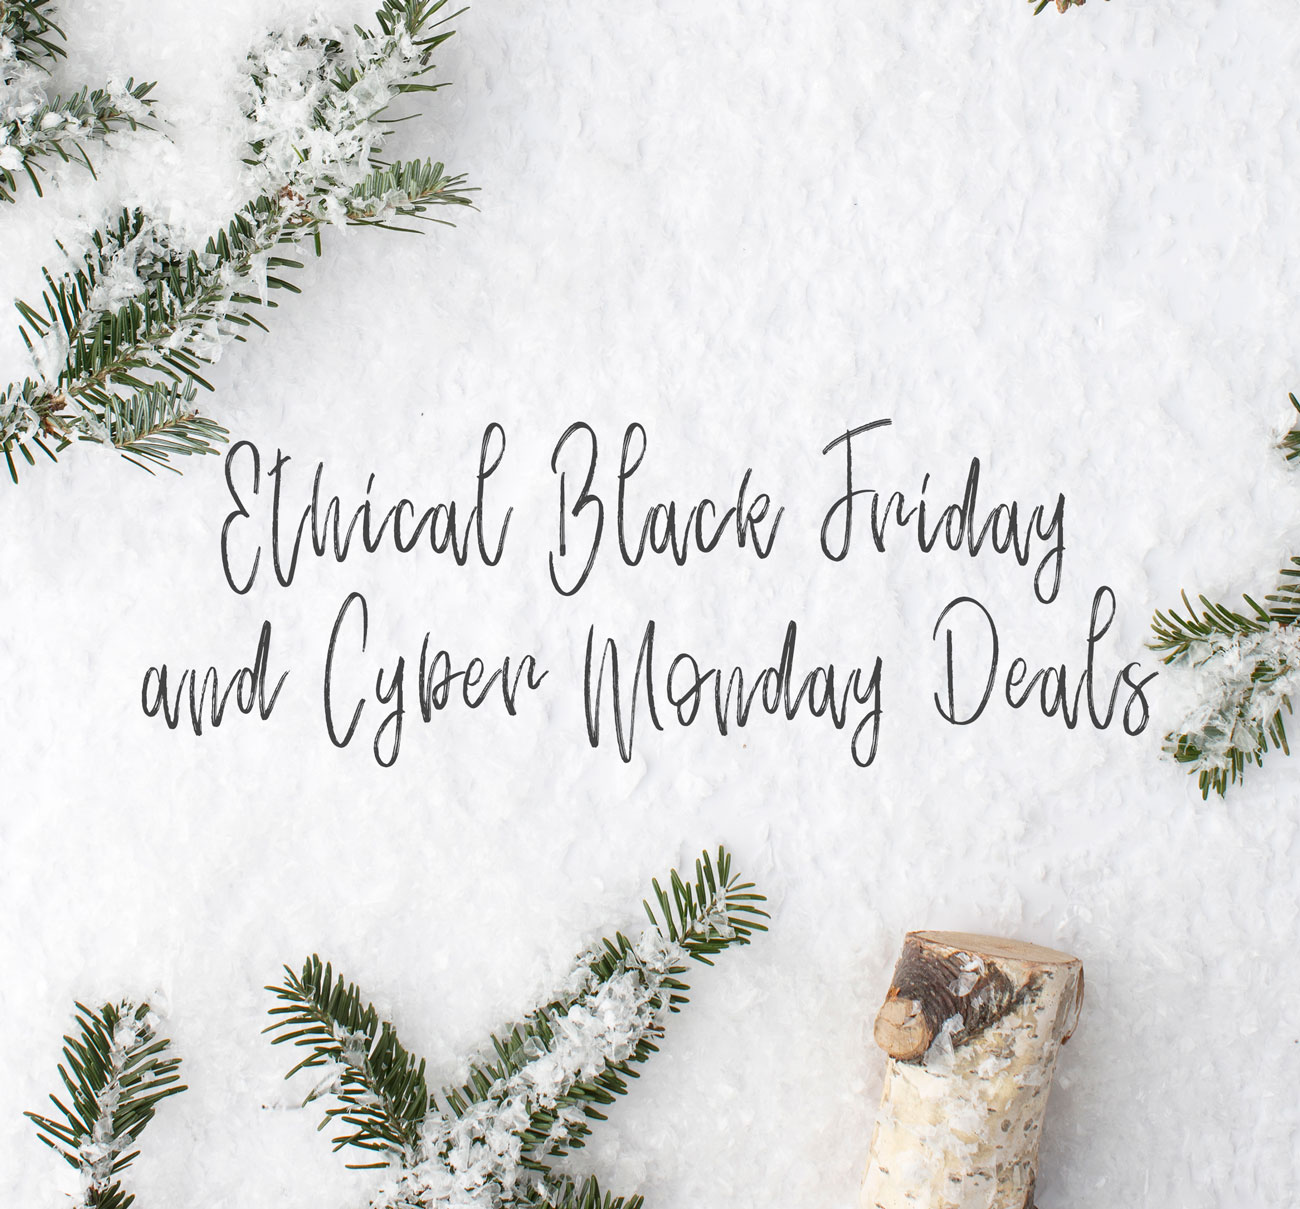 Ethical Black Friday & Cyber Monday Deals by North Carolina ethical style blogger Still Being Molly